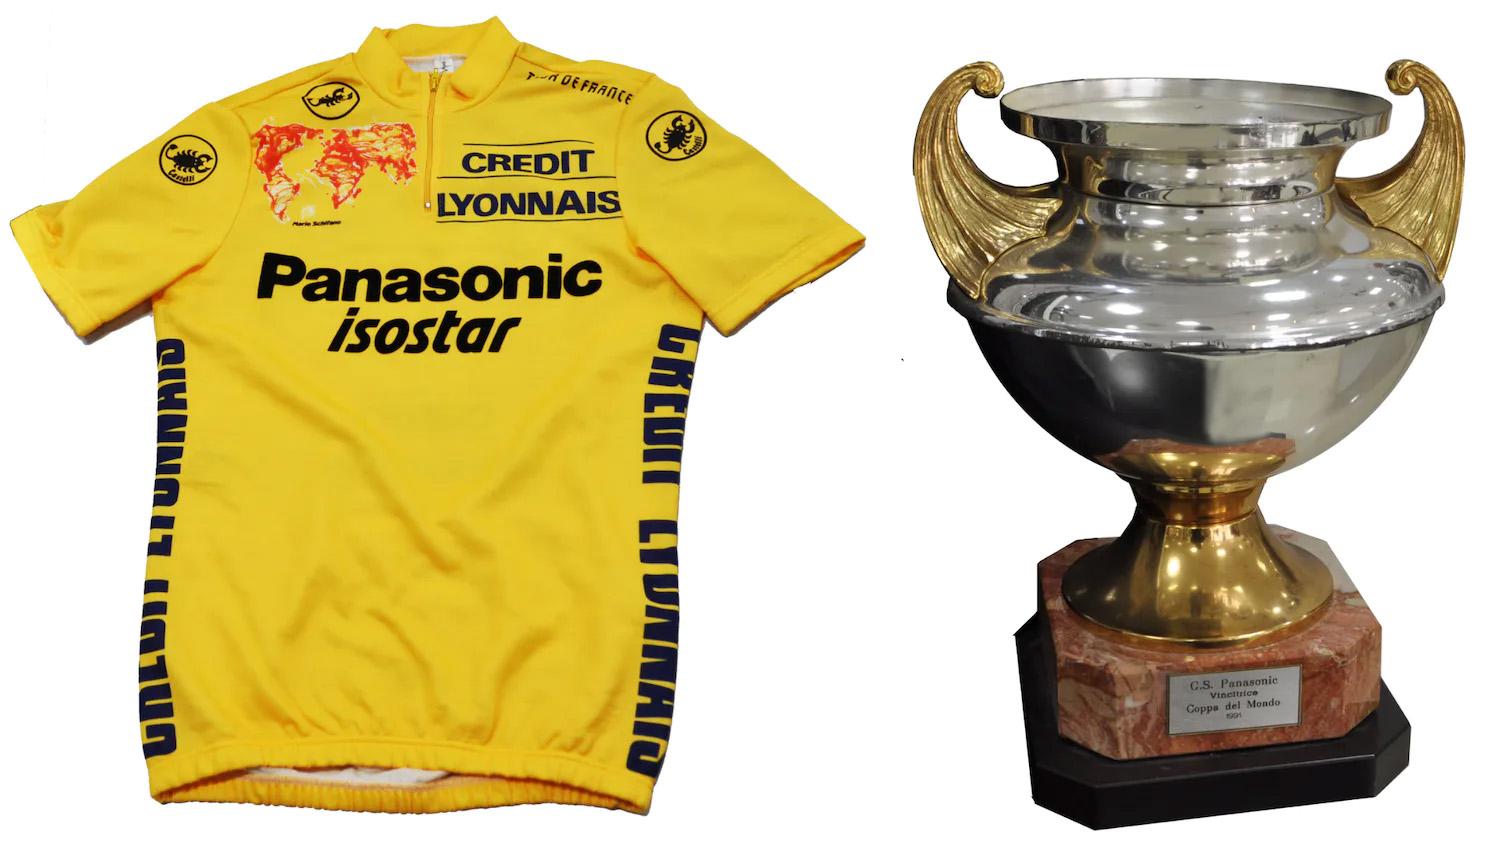 In the 90s Panasonic sponsored the racing team in the Netherlands 